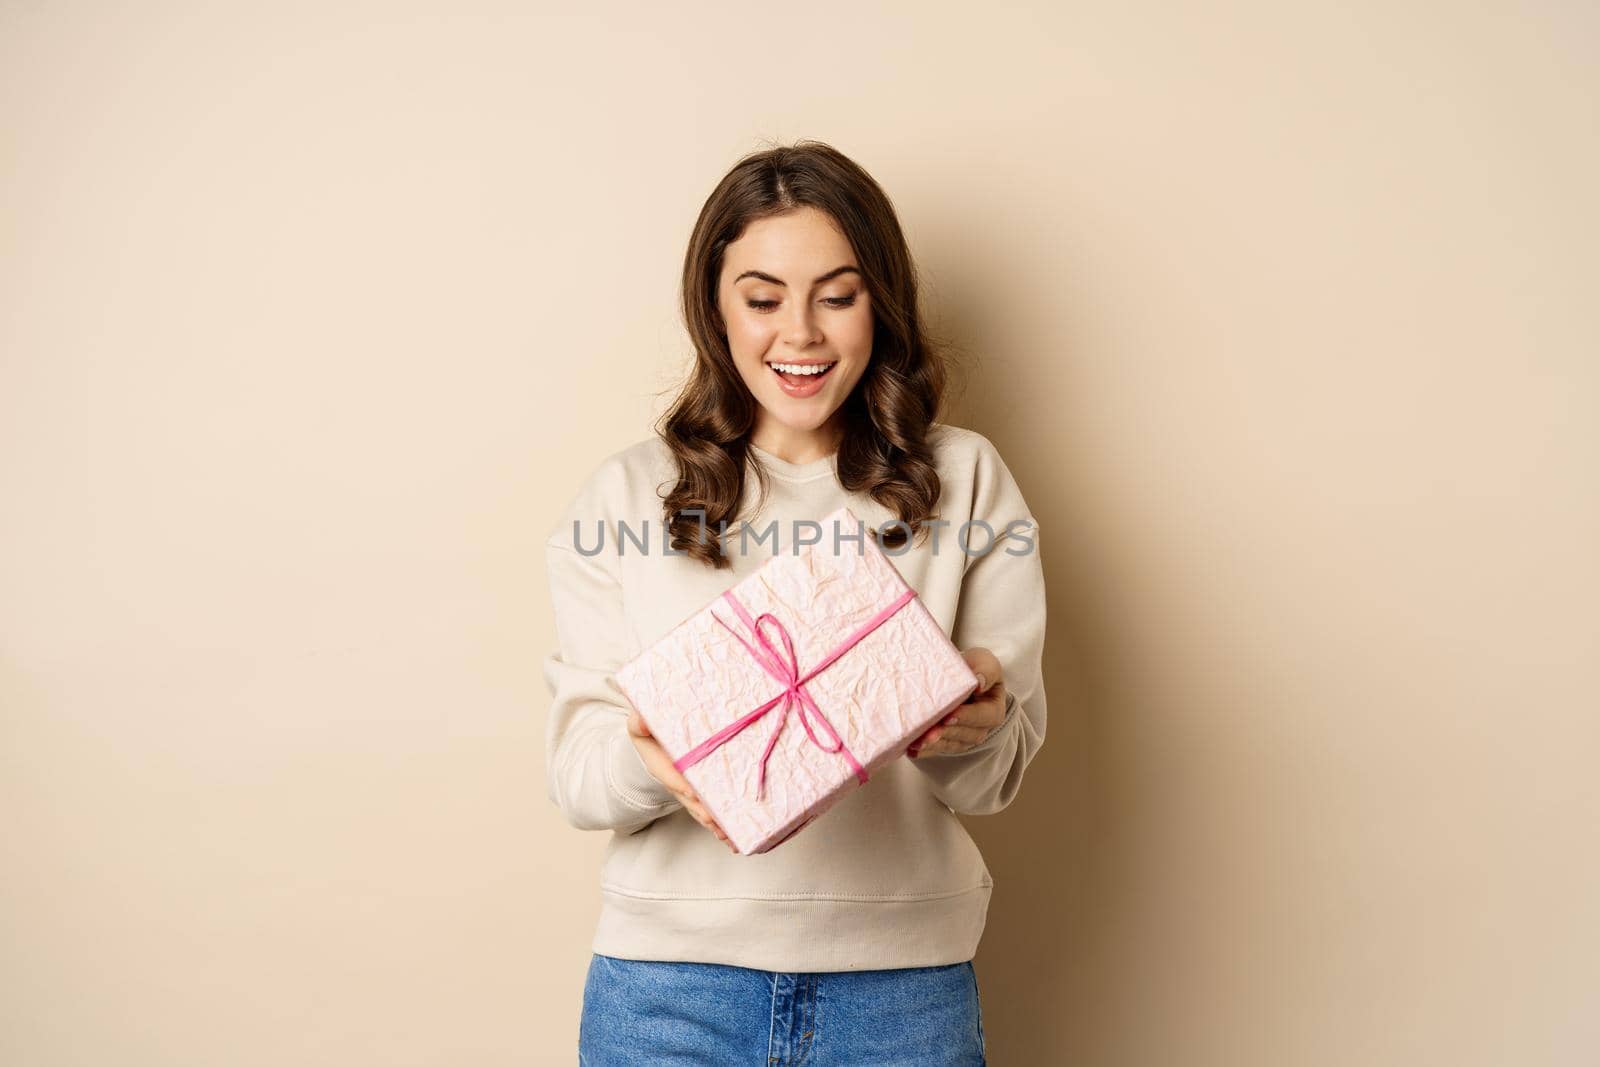 Excited beautiful girl with pink wrapped gift box, receive presents, standing over beige background.